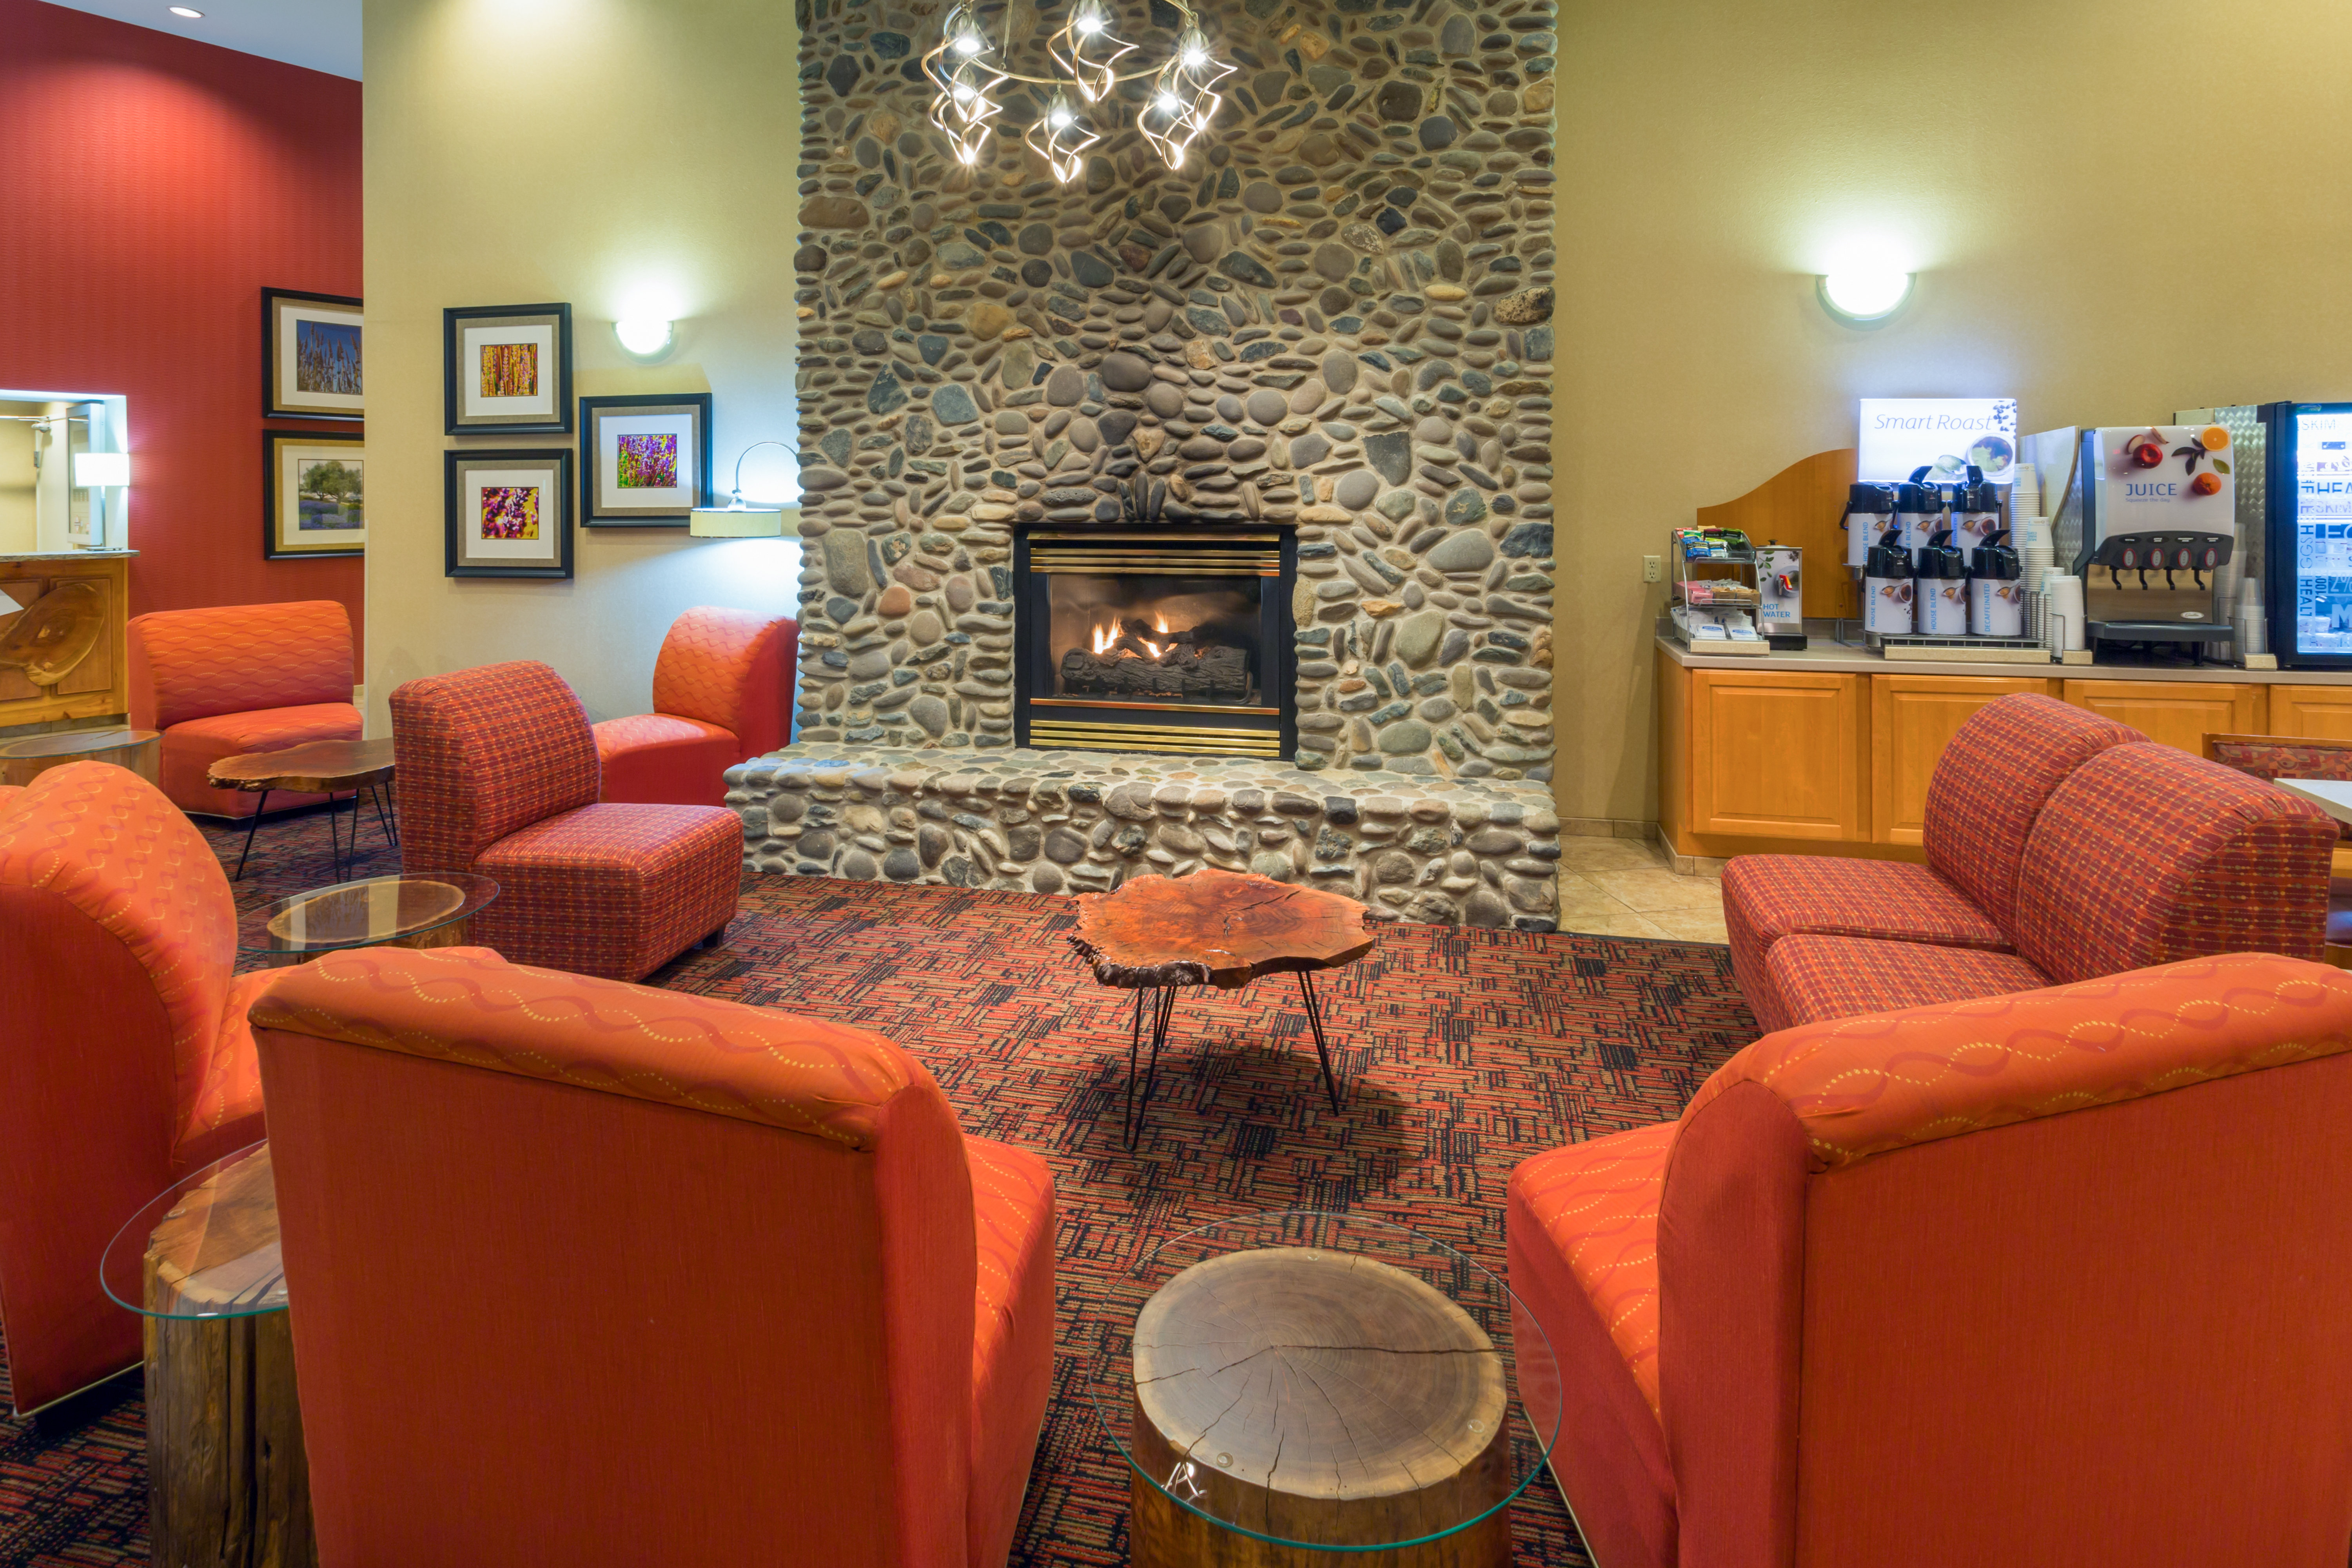 Lobby Lounge with Cozy Fireplace for Relaxing